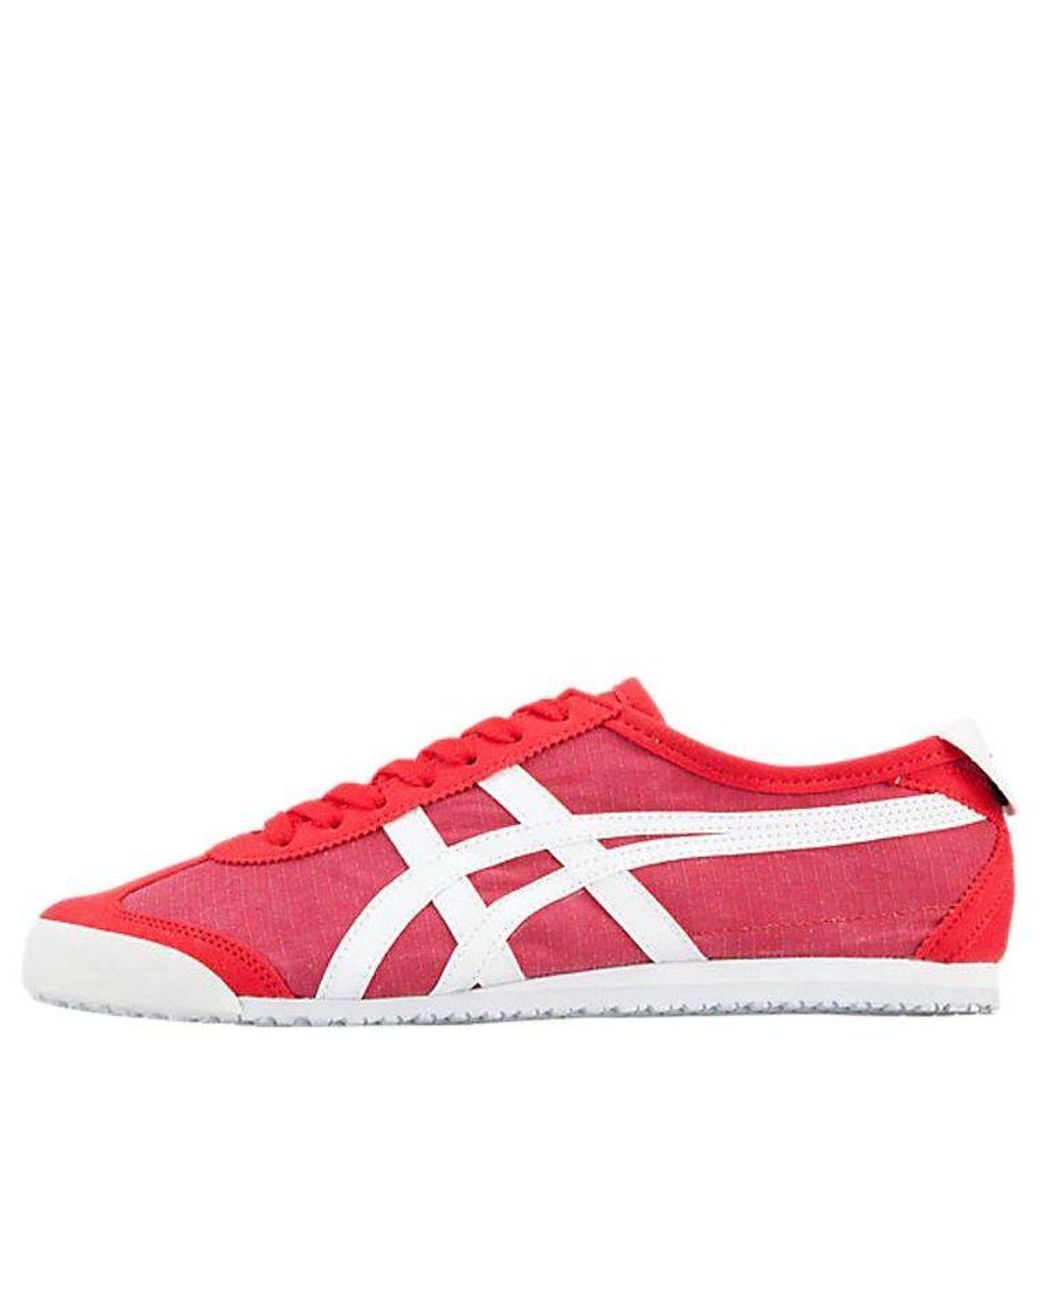 Onitsuka Tiger Mexico 66 Red | Lyst